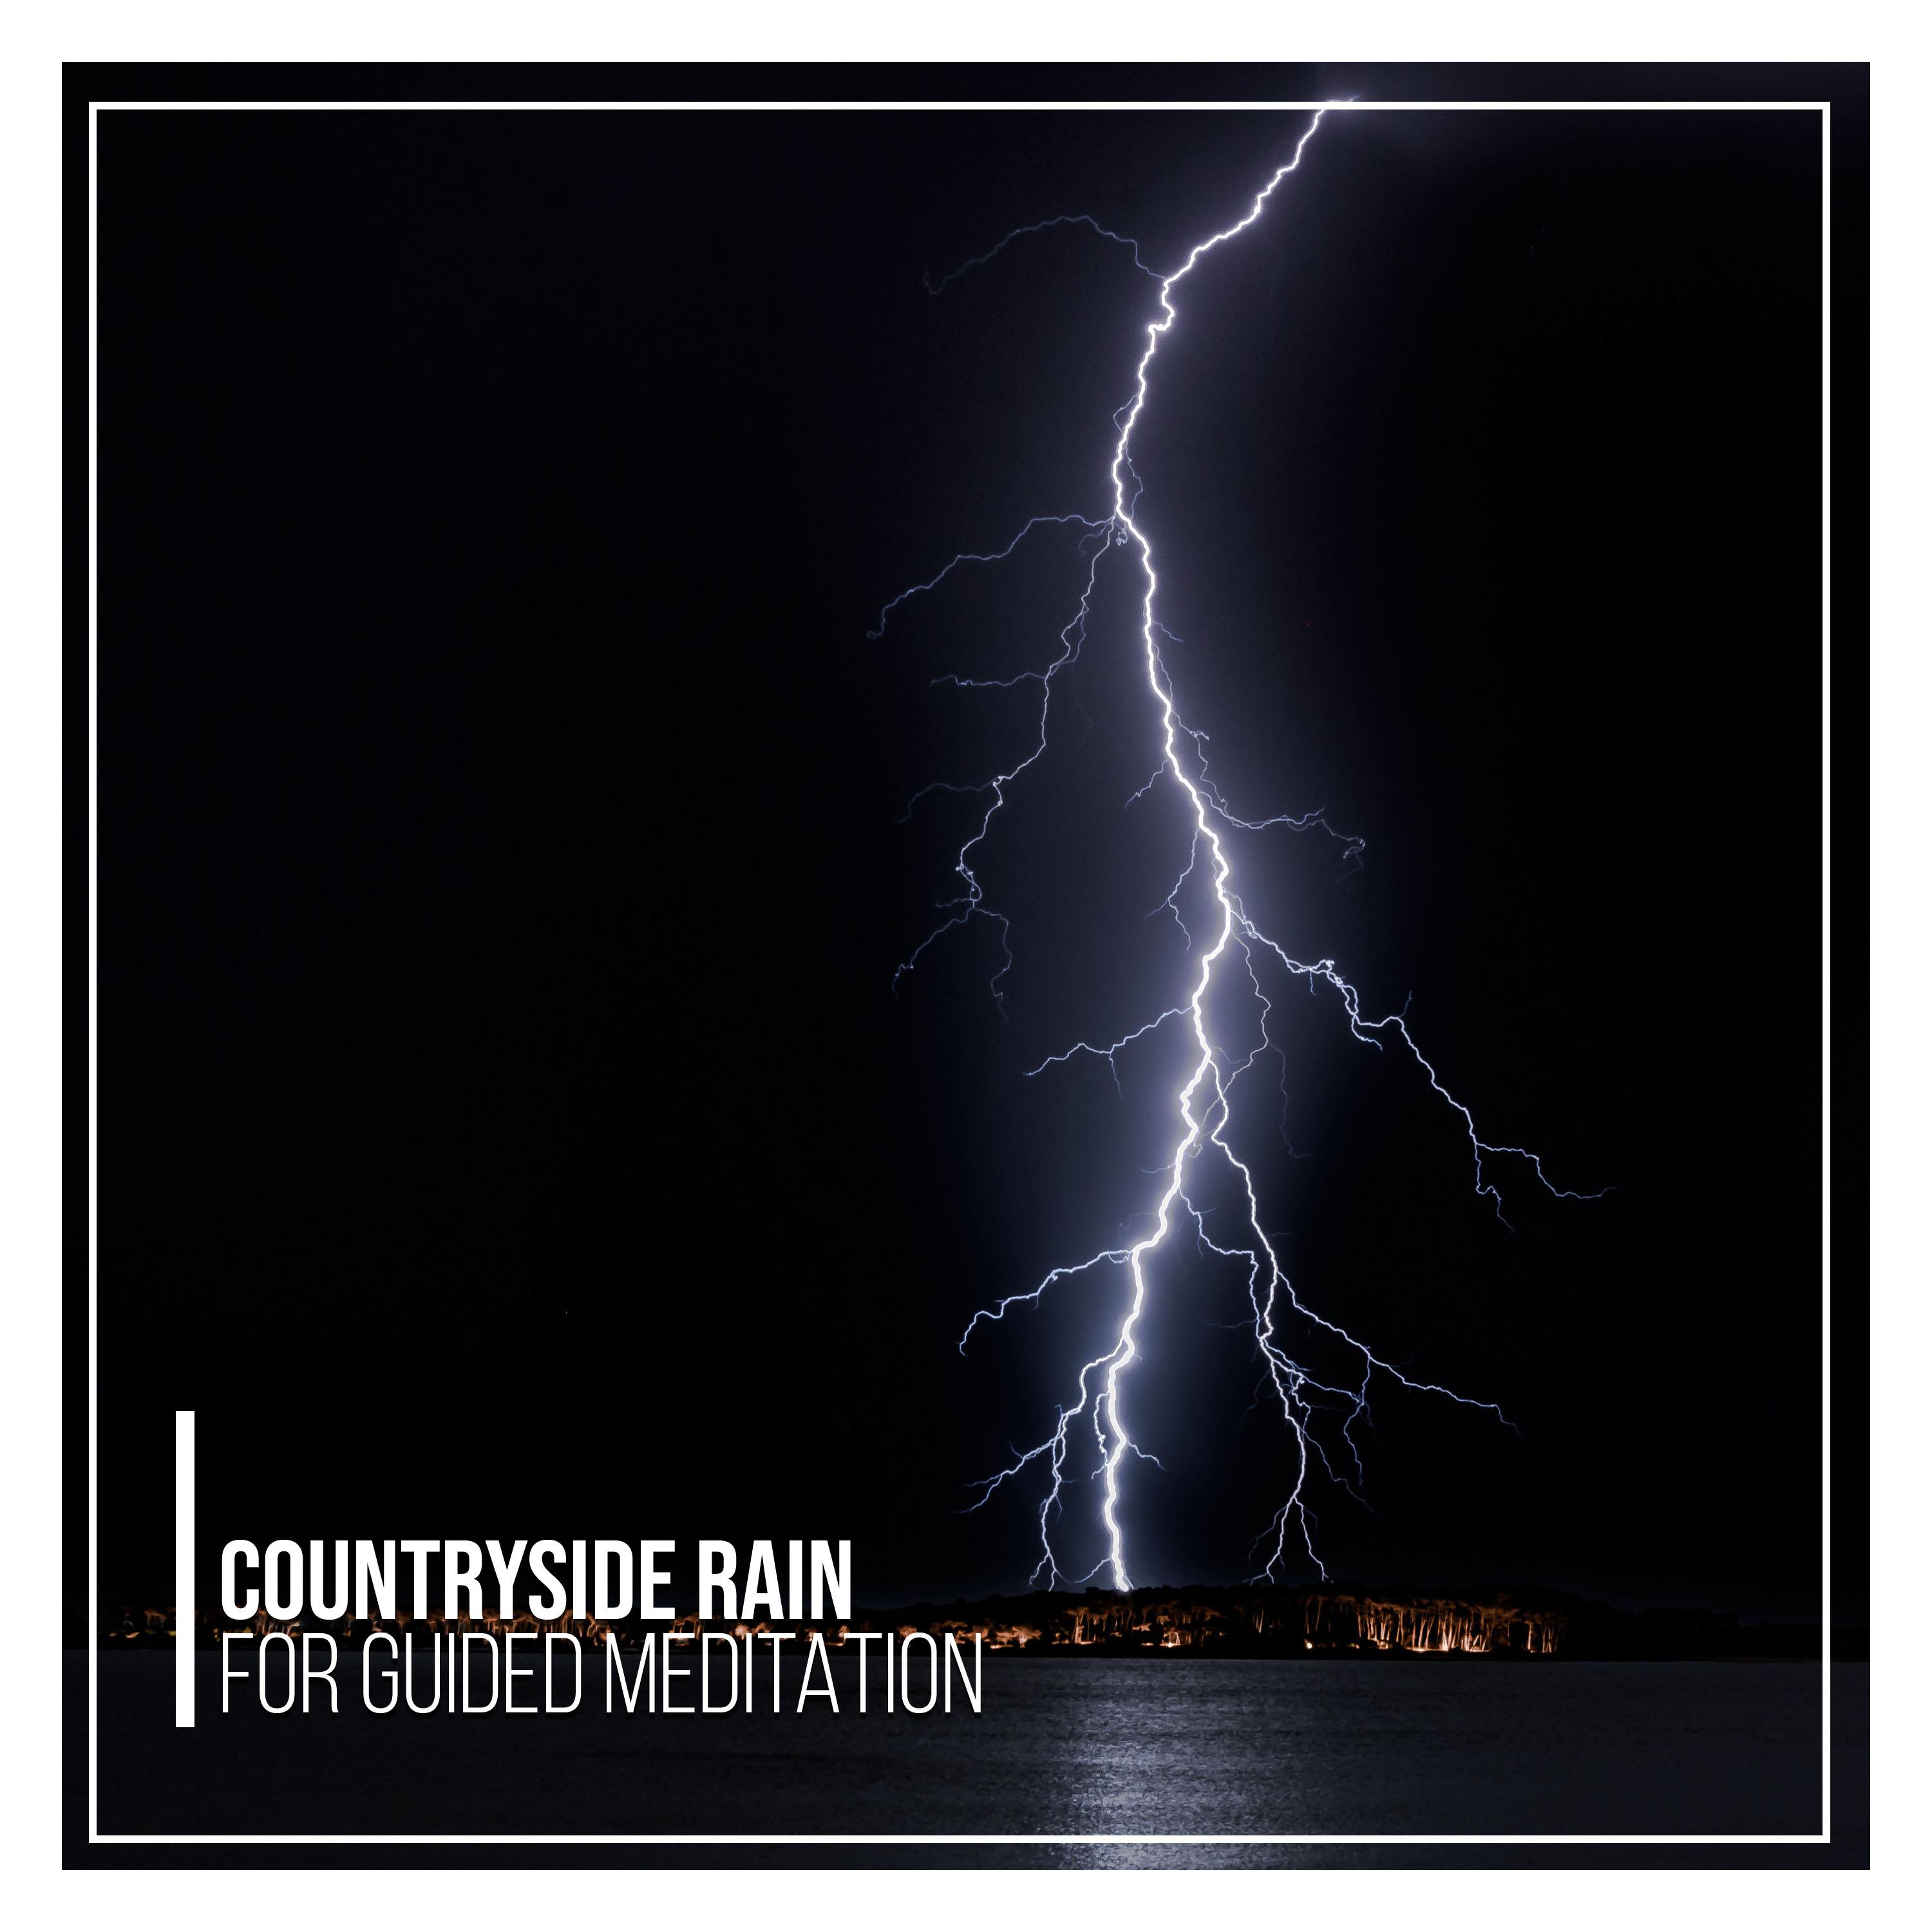 17 Countryside Rain Songs for Guided Meditation